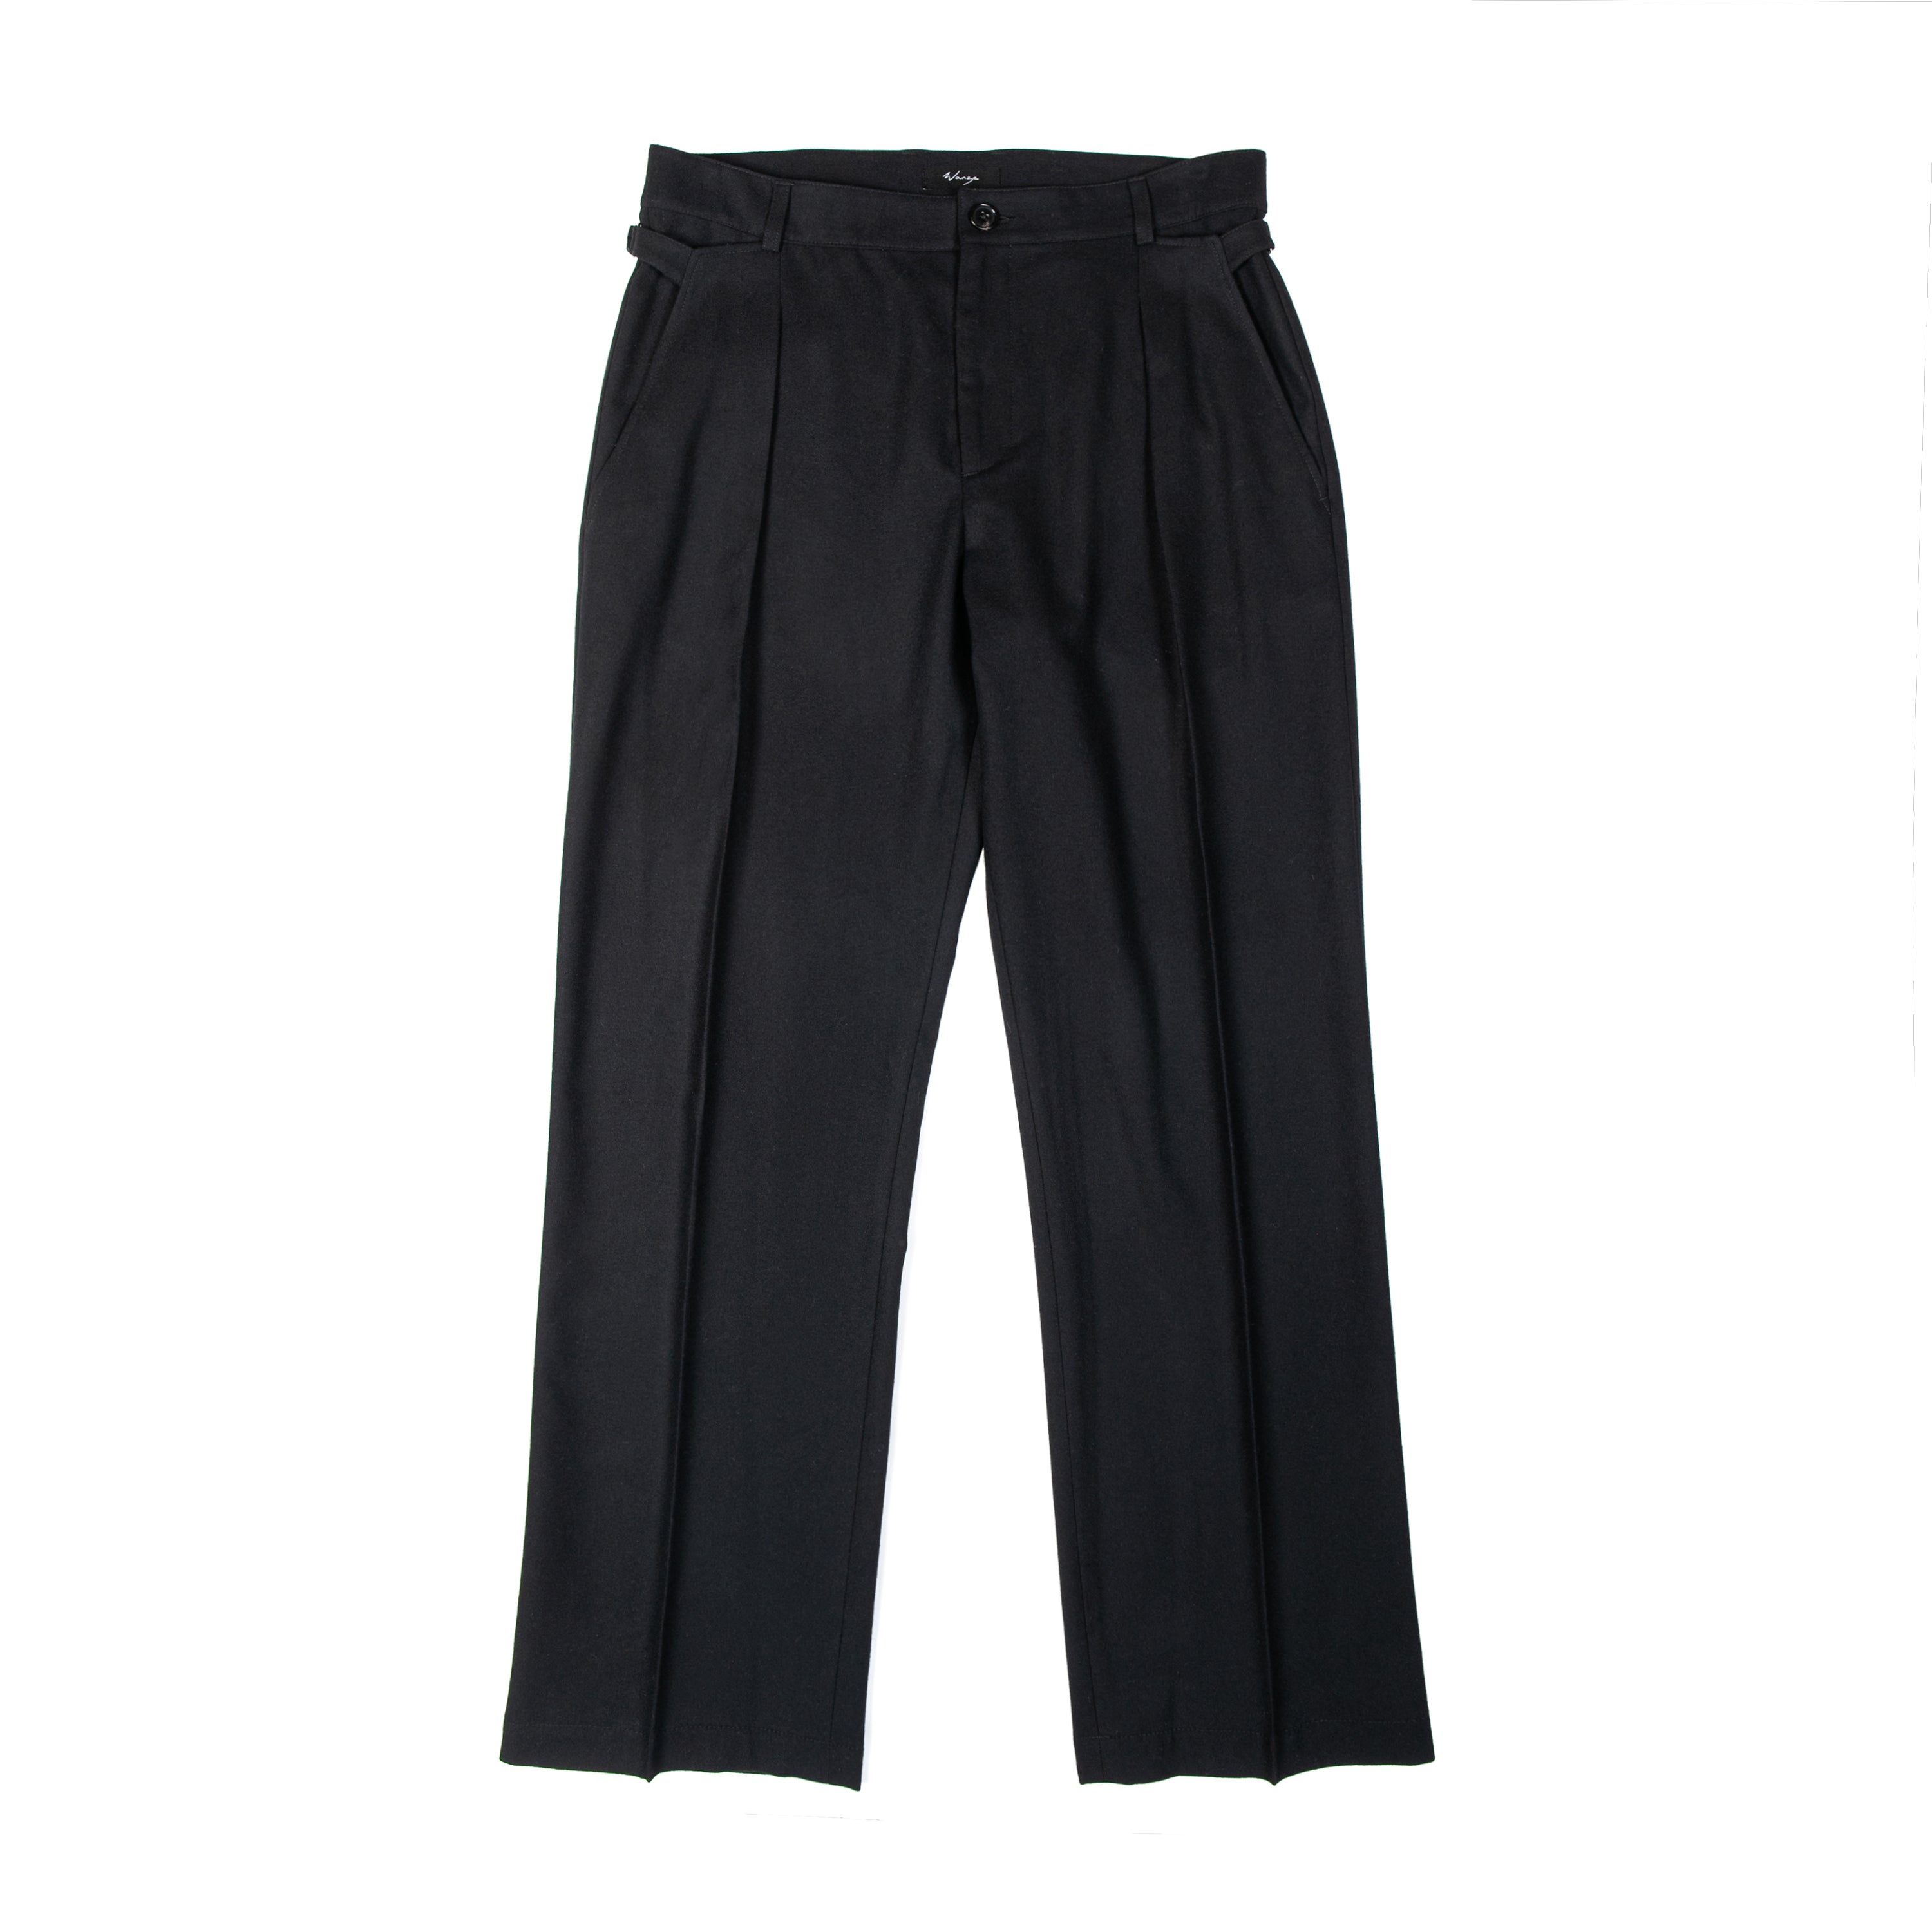 Cinch Trousers Felted Wool Cashmere Black - PREORDER